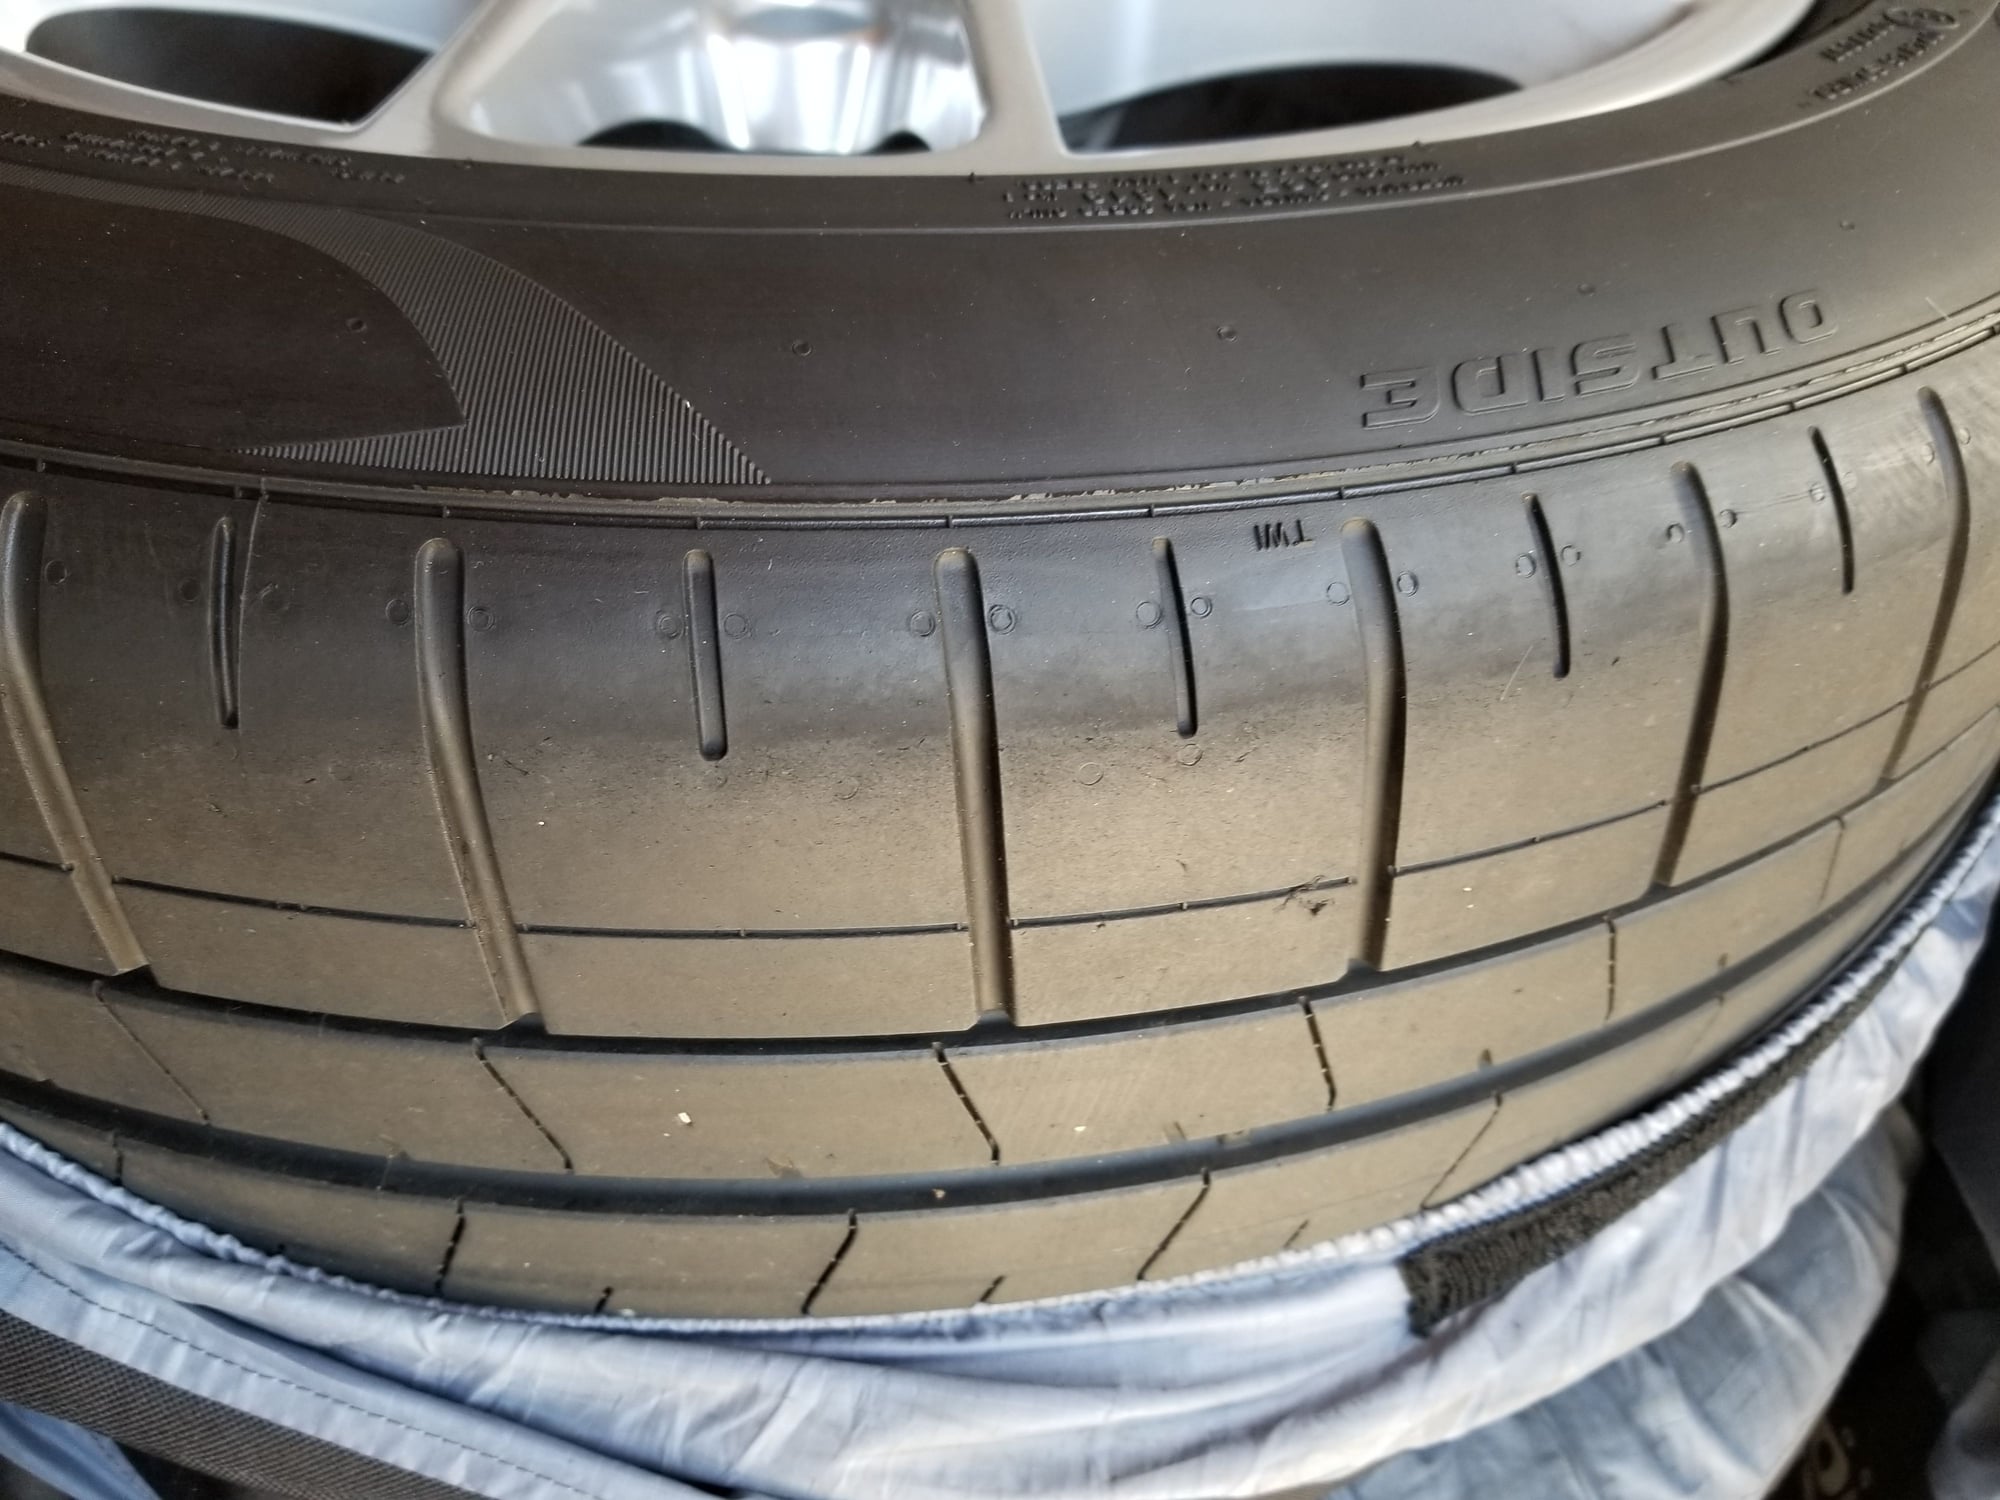 Wheels and Tires/Axles - FS:  718 Cayman OEM 18" wheels and tires - Used - 2017 to 2019 Porsche 718 Cayman - San Diego, CA 92107, United States